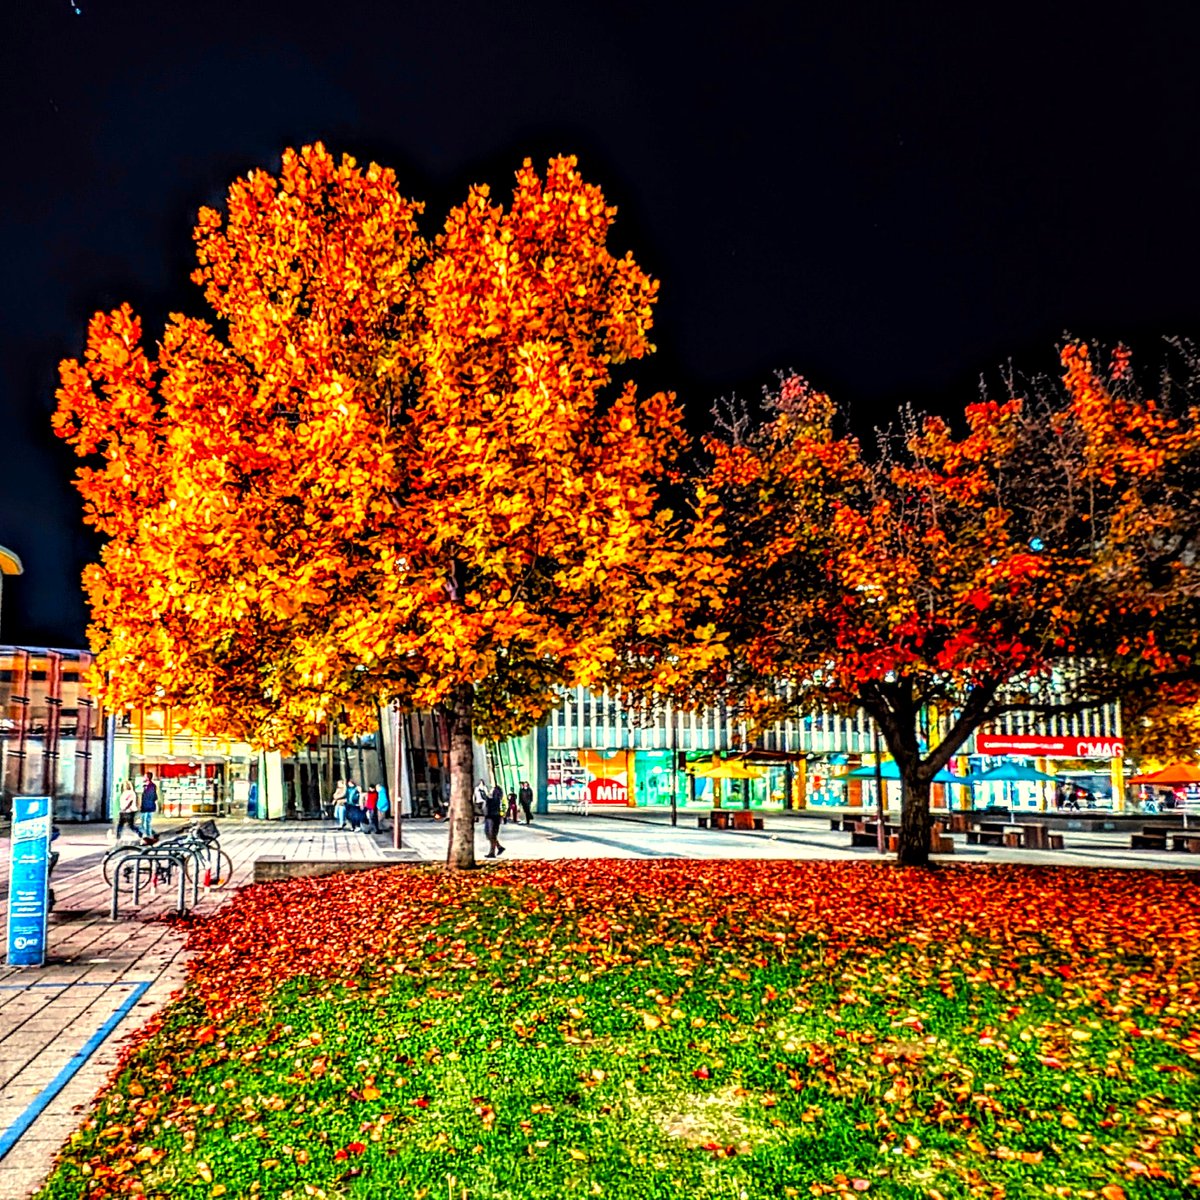 Autumnal Manchurian Pear in Civic Square at night.
#visitcanberra